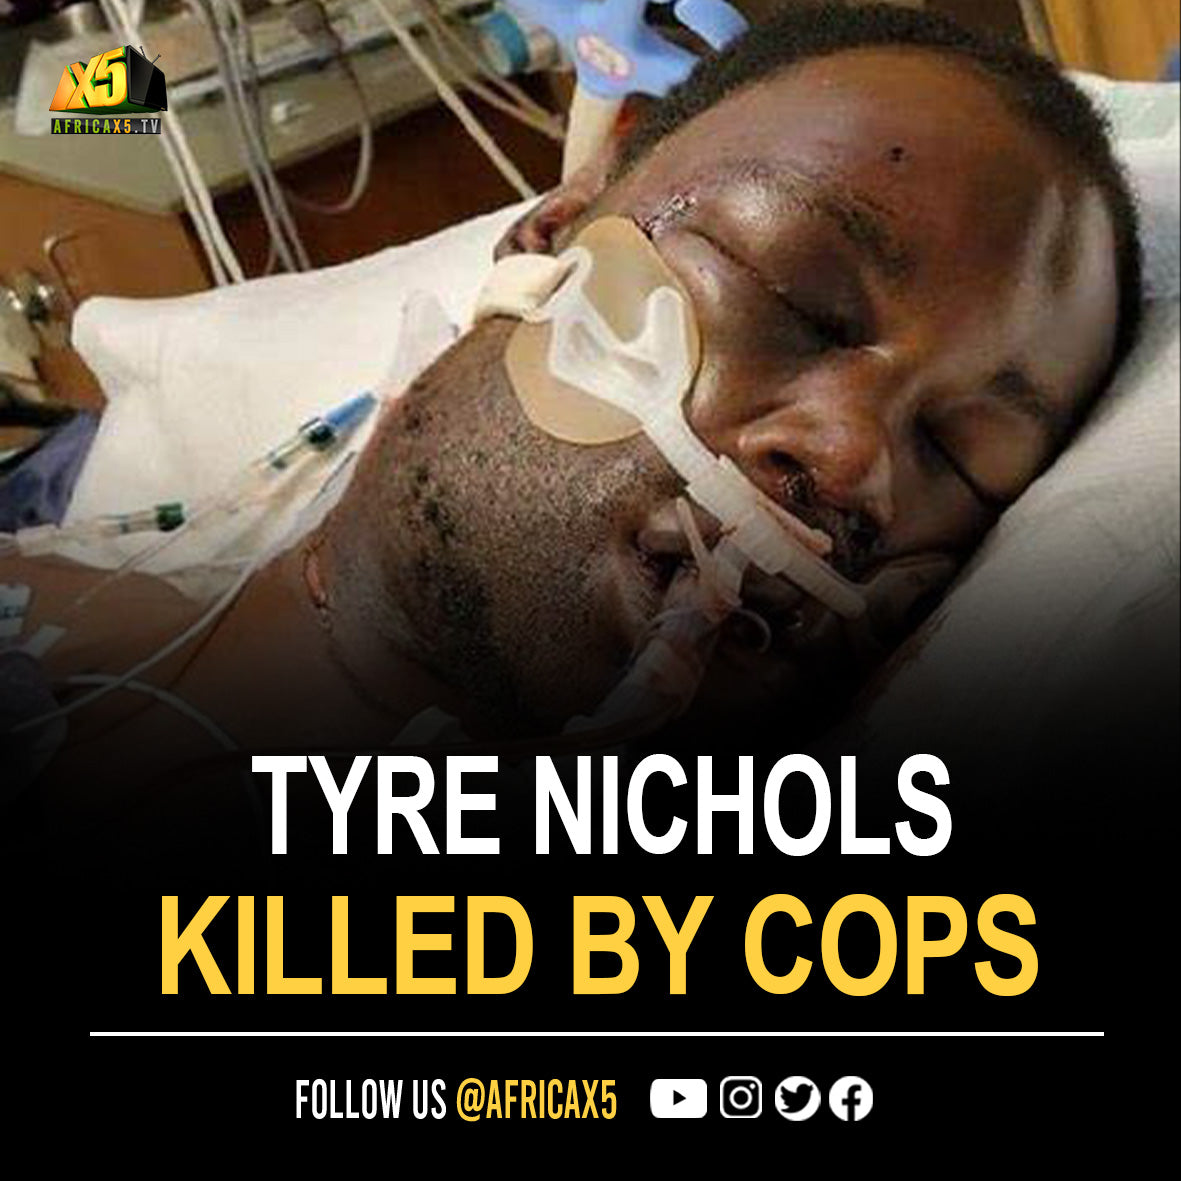 Brutal body camera video showing Tyre Nichols being beaten, pepper sprayed and Tasered by multiple cops during a traffic stop earlier this month leading to his Death.